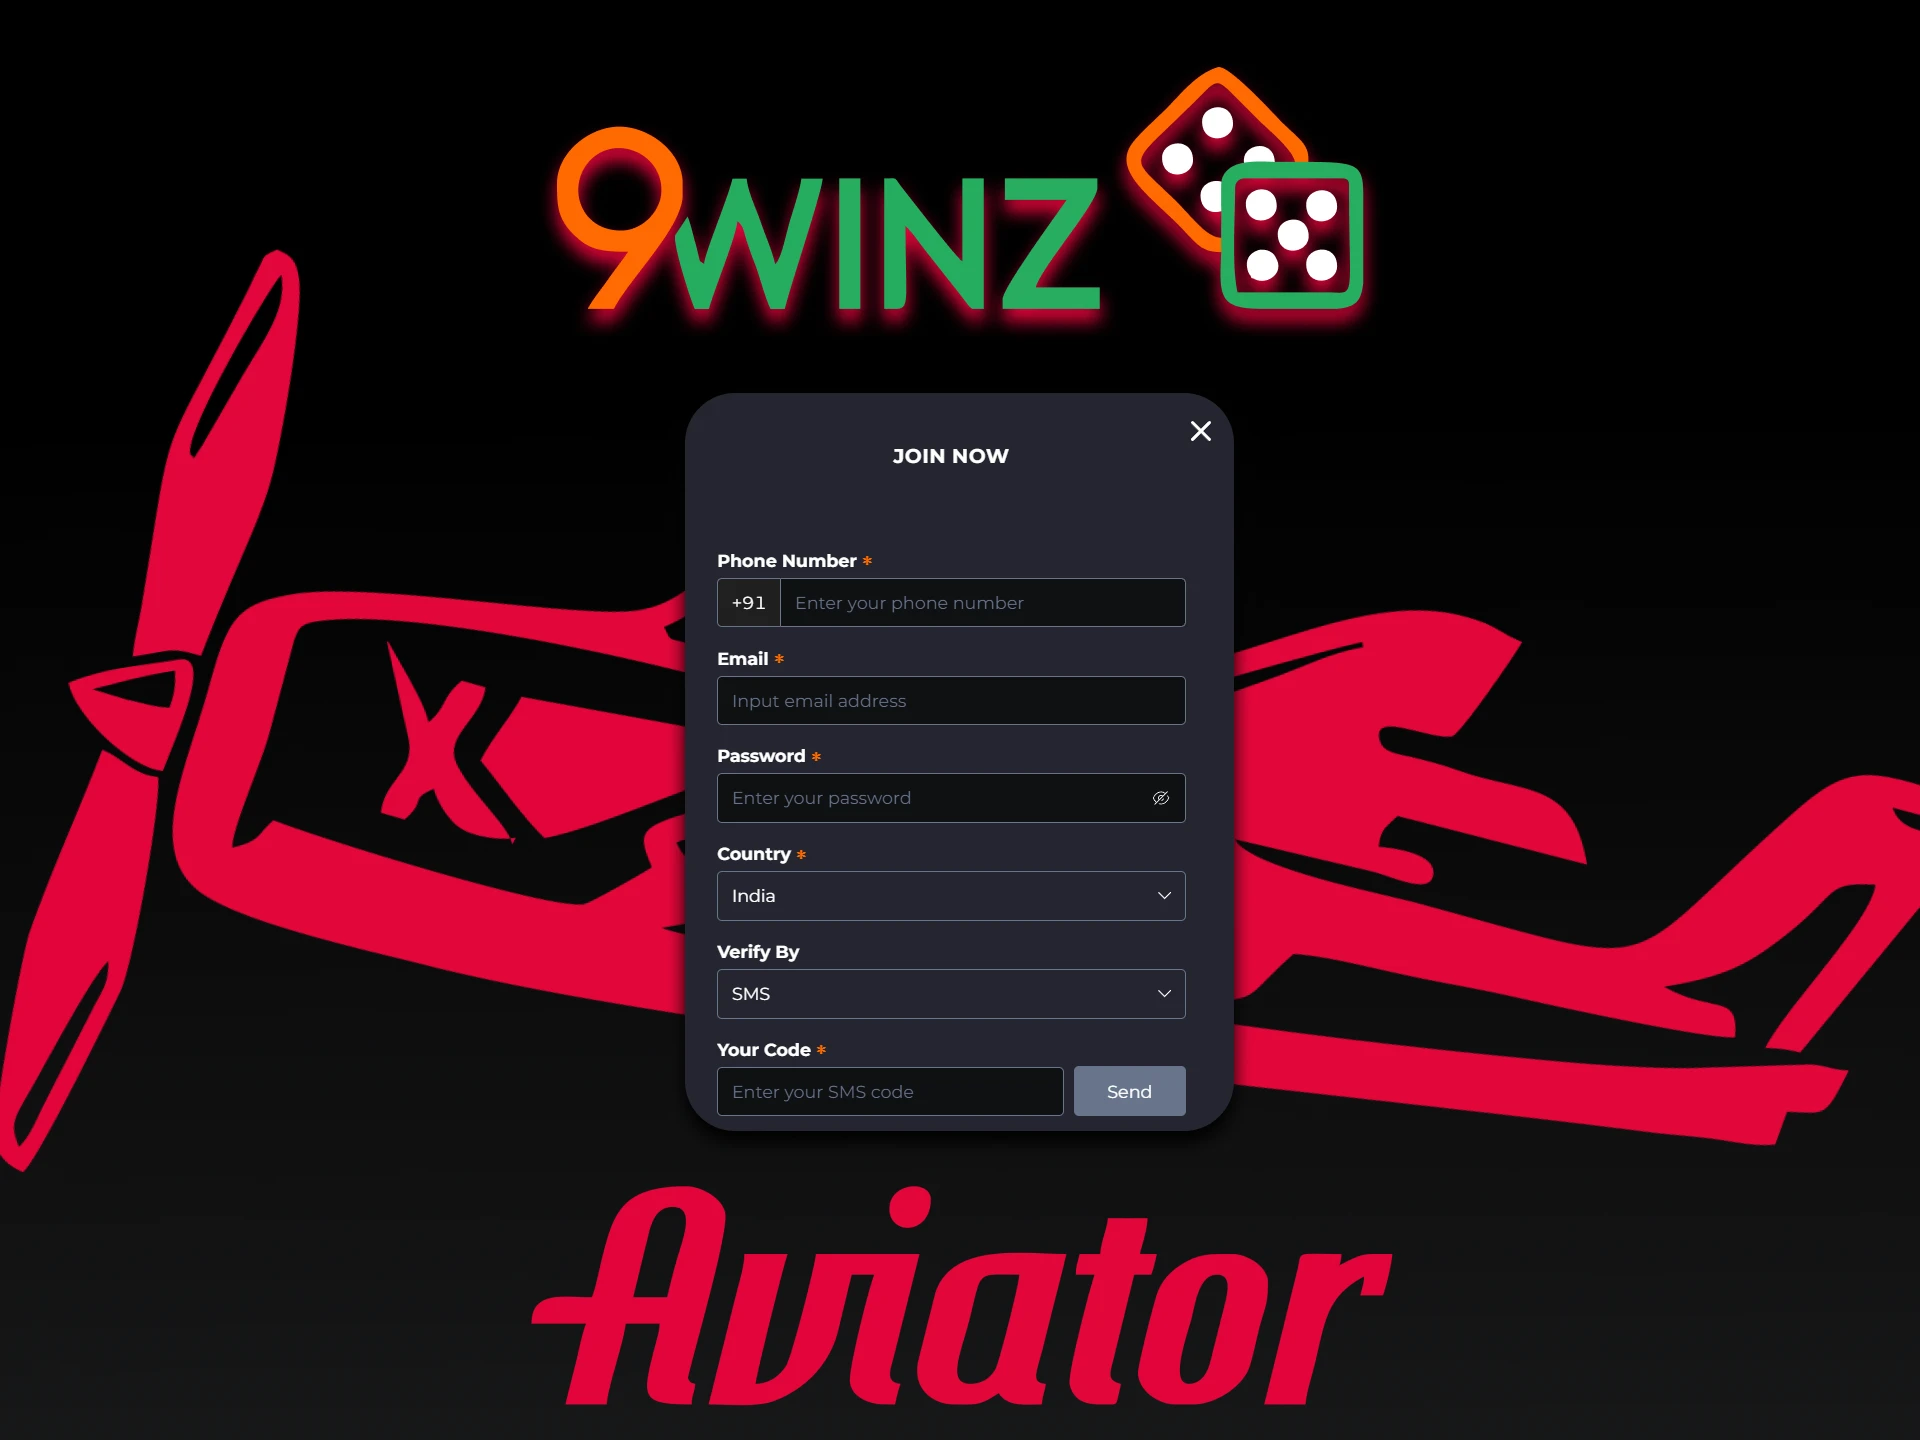 Go through the registration process on 9winz to play Aviator.